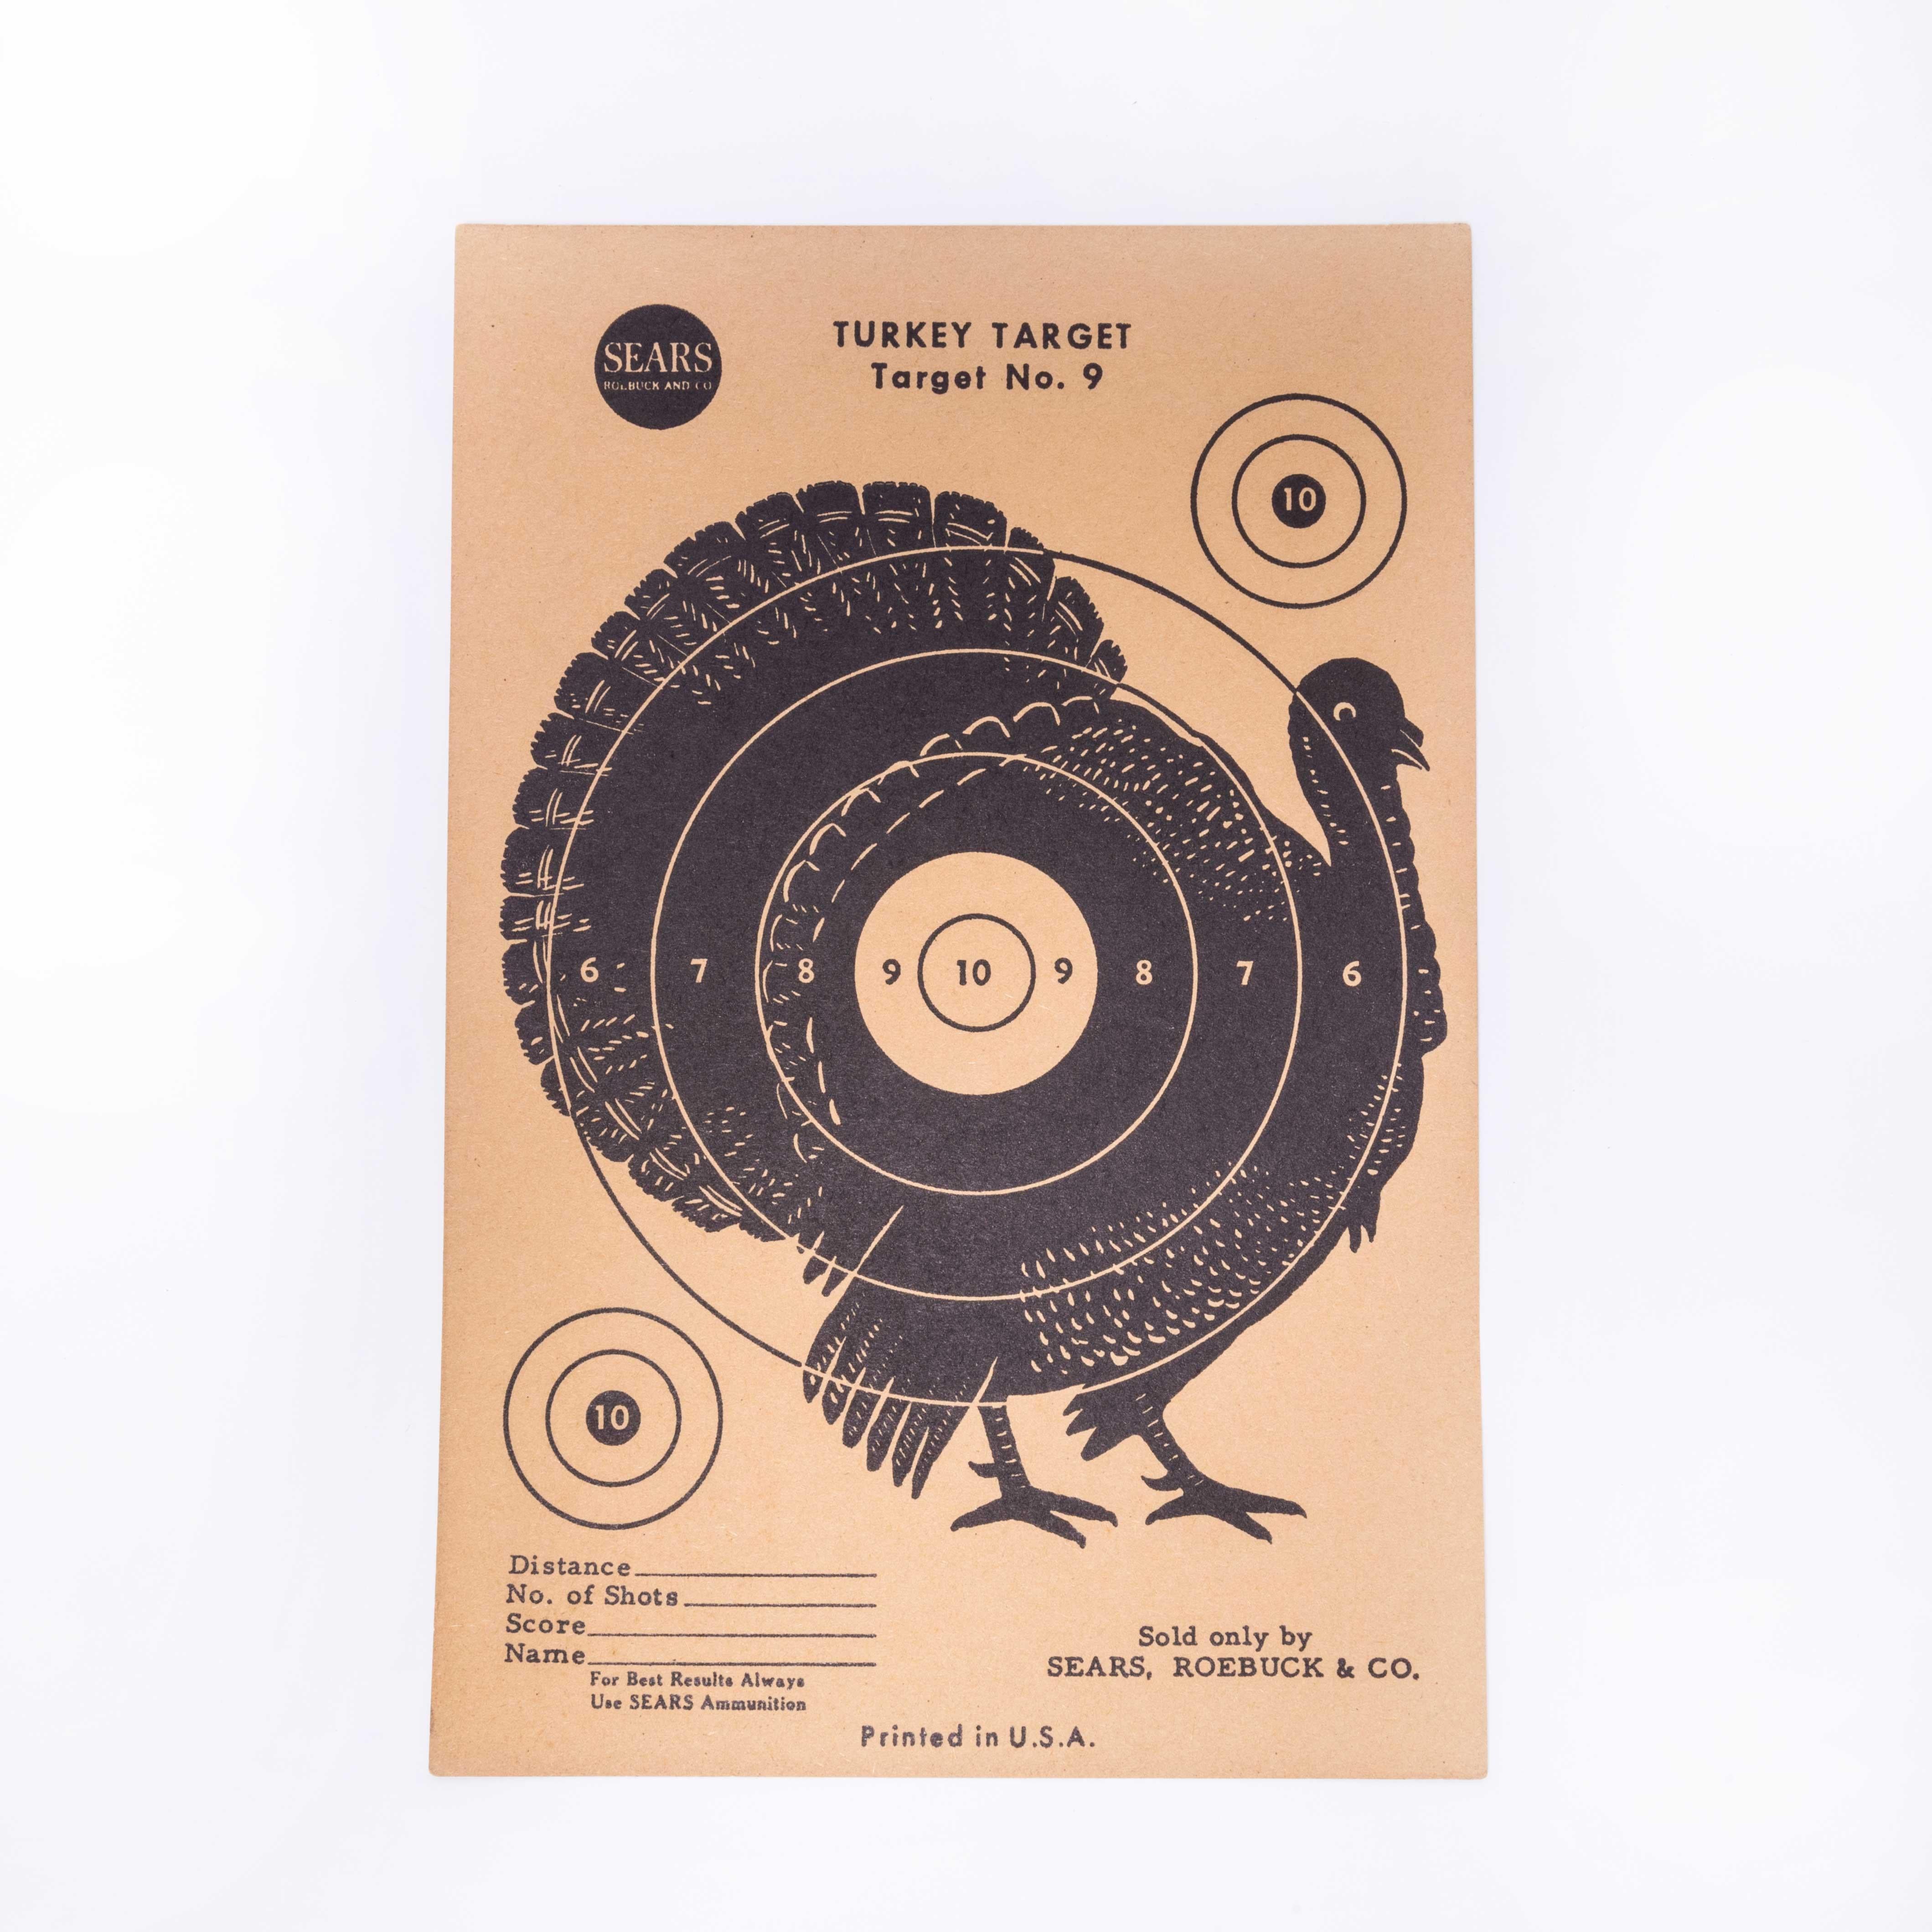 American Turkey shooting target
American Turkey shooting target. 1950’s American Fox Shooting Target. New old stock vintage paper shooting targets by J.C Higgins for Sears Roebuck.

WORKSHOP REPORT
Our workshop team inspect every product and